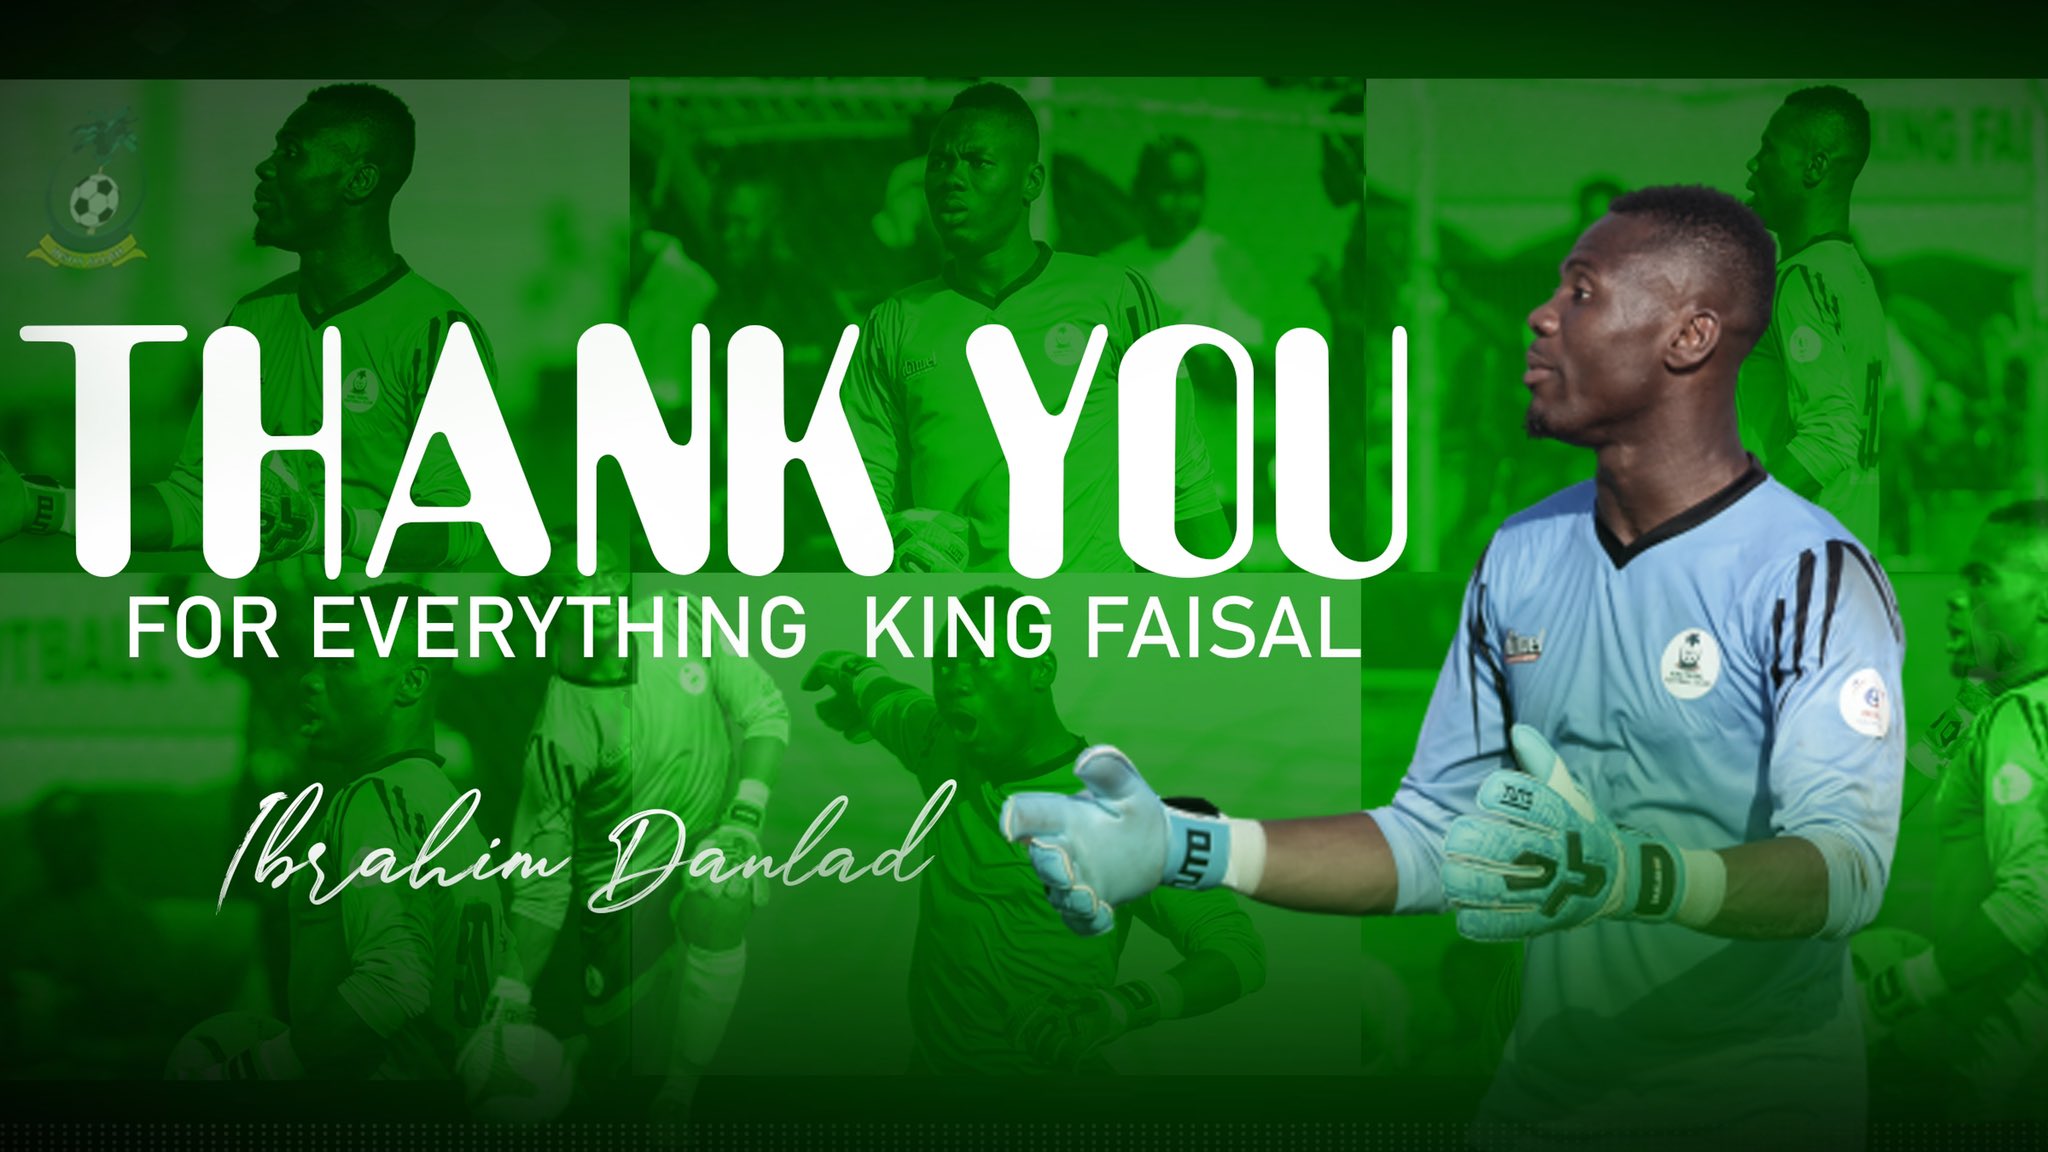 "Thank you for everything" - Danlad Ibrahim bids farewell to King Faisal